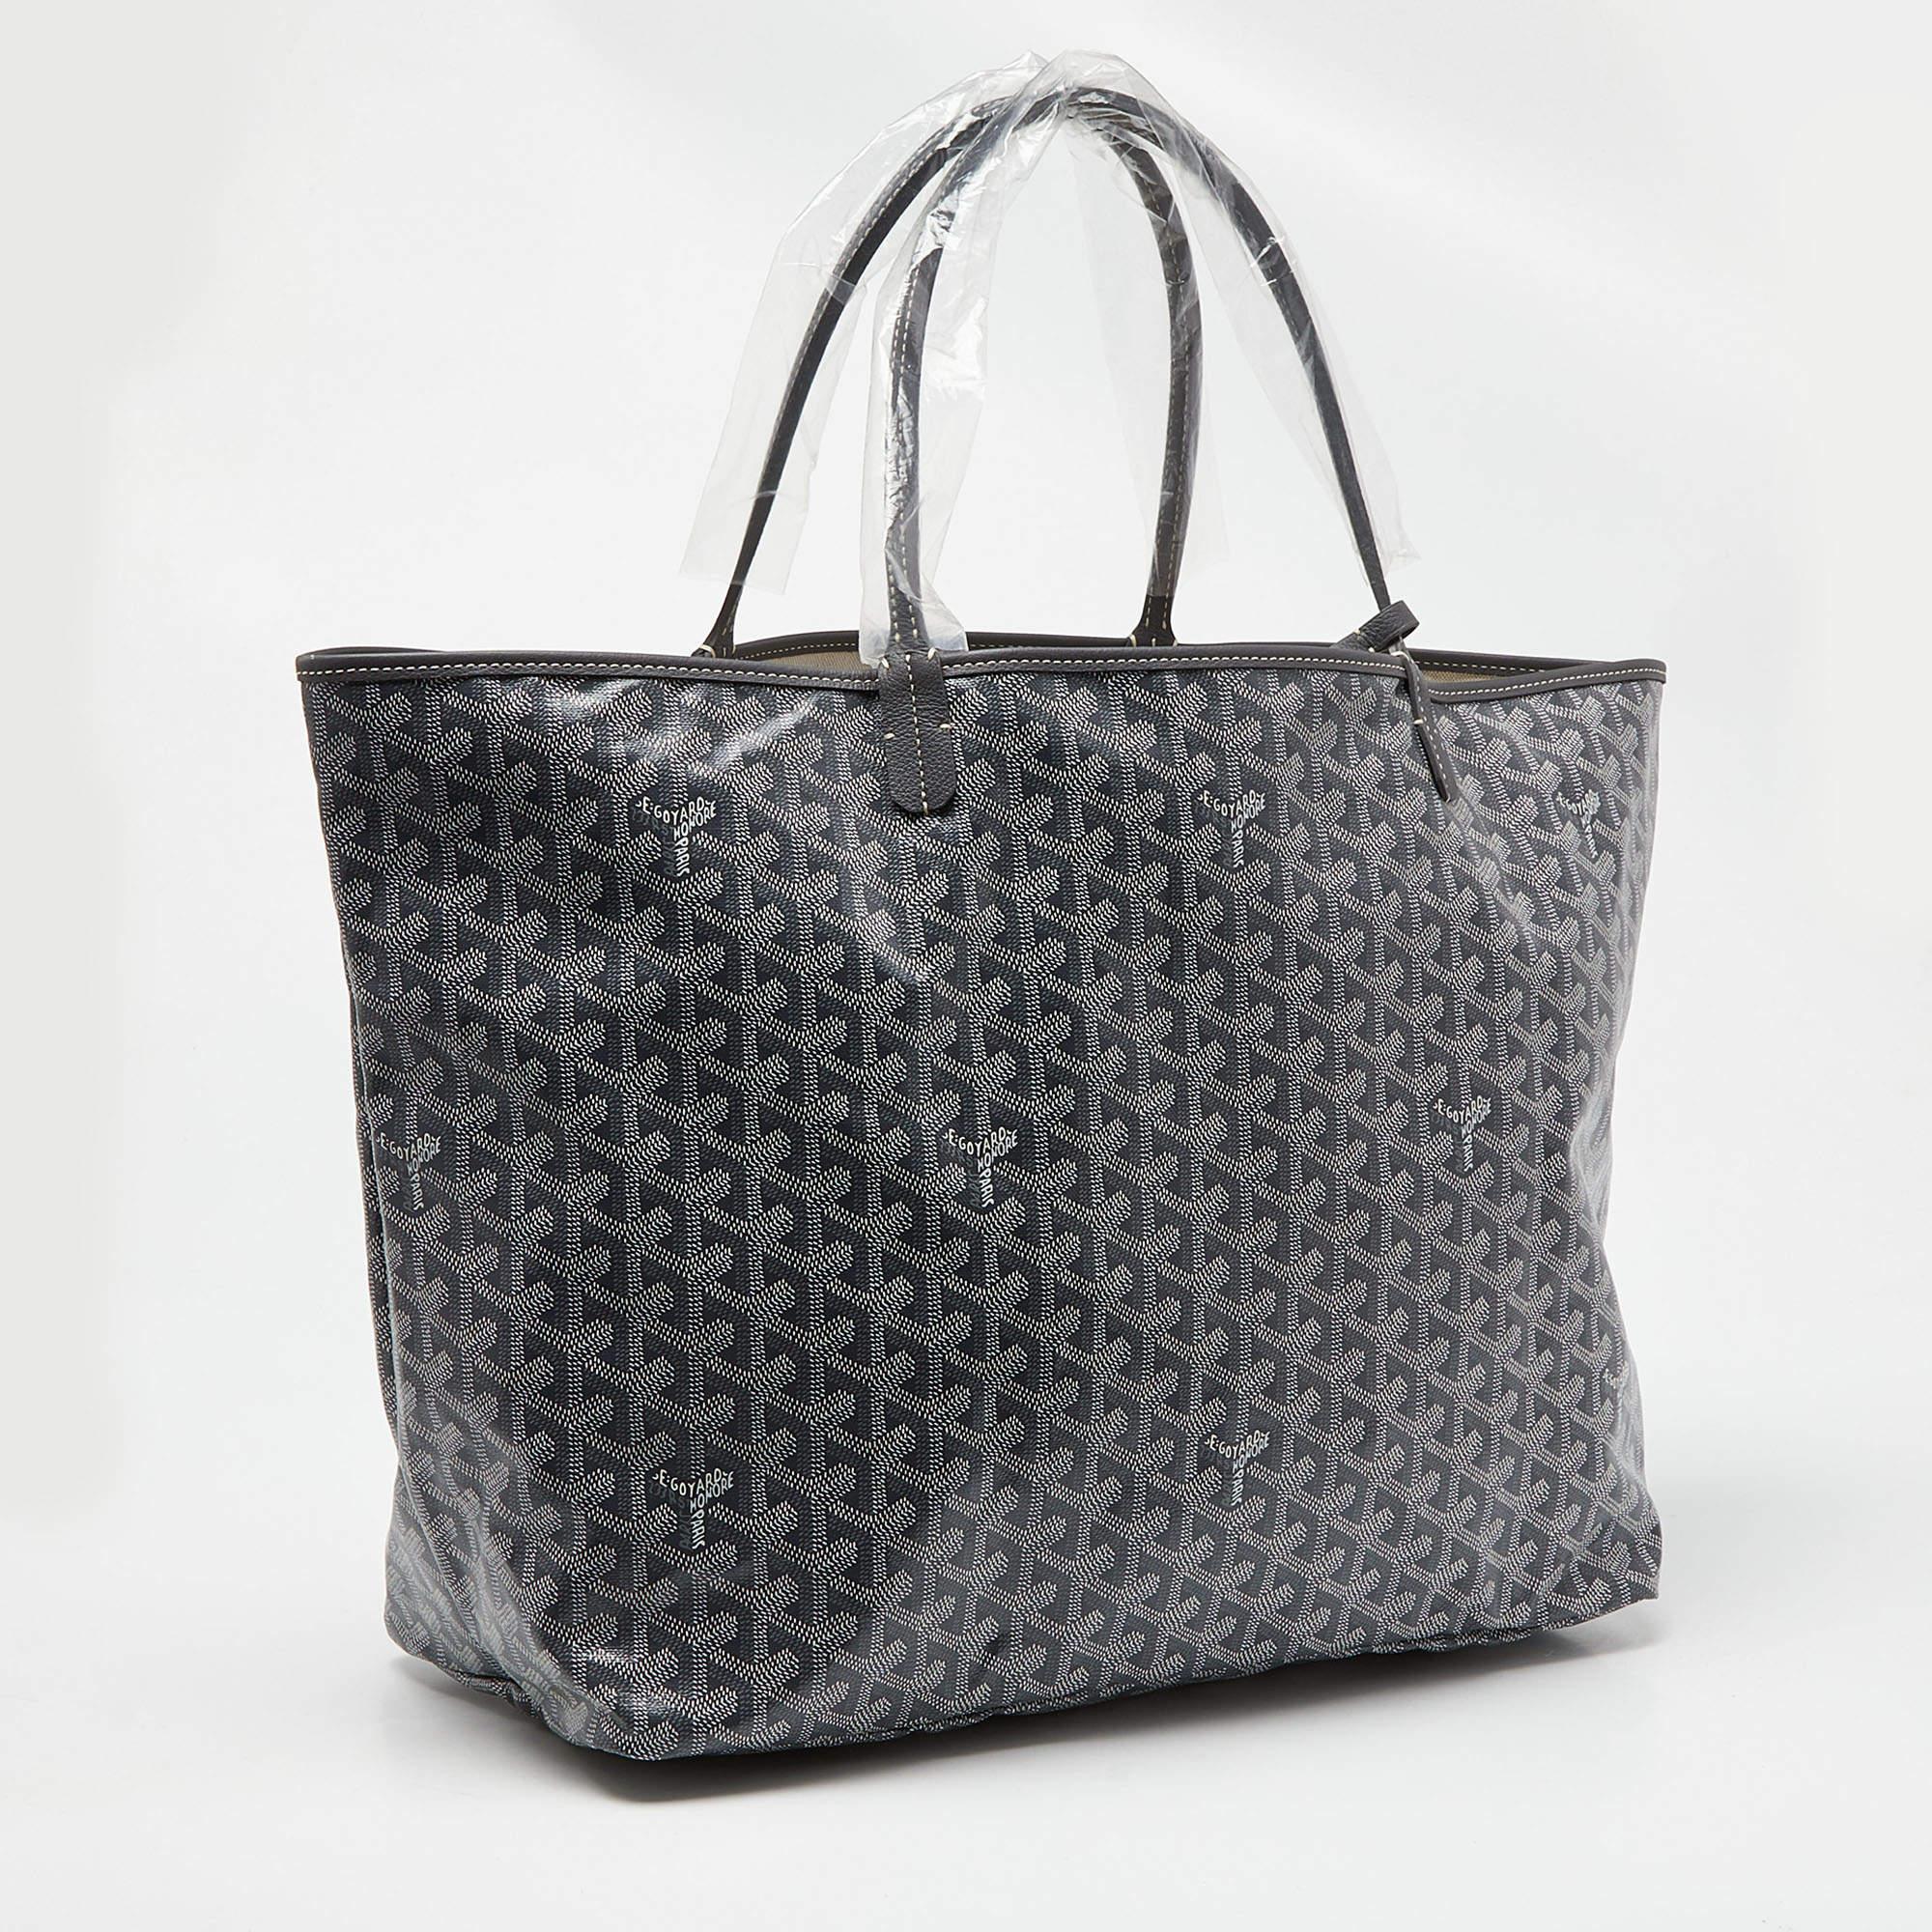 This Goyard Saint Louis tote is the result of impeccable construction and artistic design. It is created from the signature Goyardine-coated canvas and leather into a spacious silhouette. With a perfect combination of elegance and practicality, it